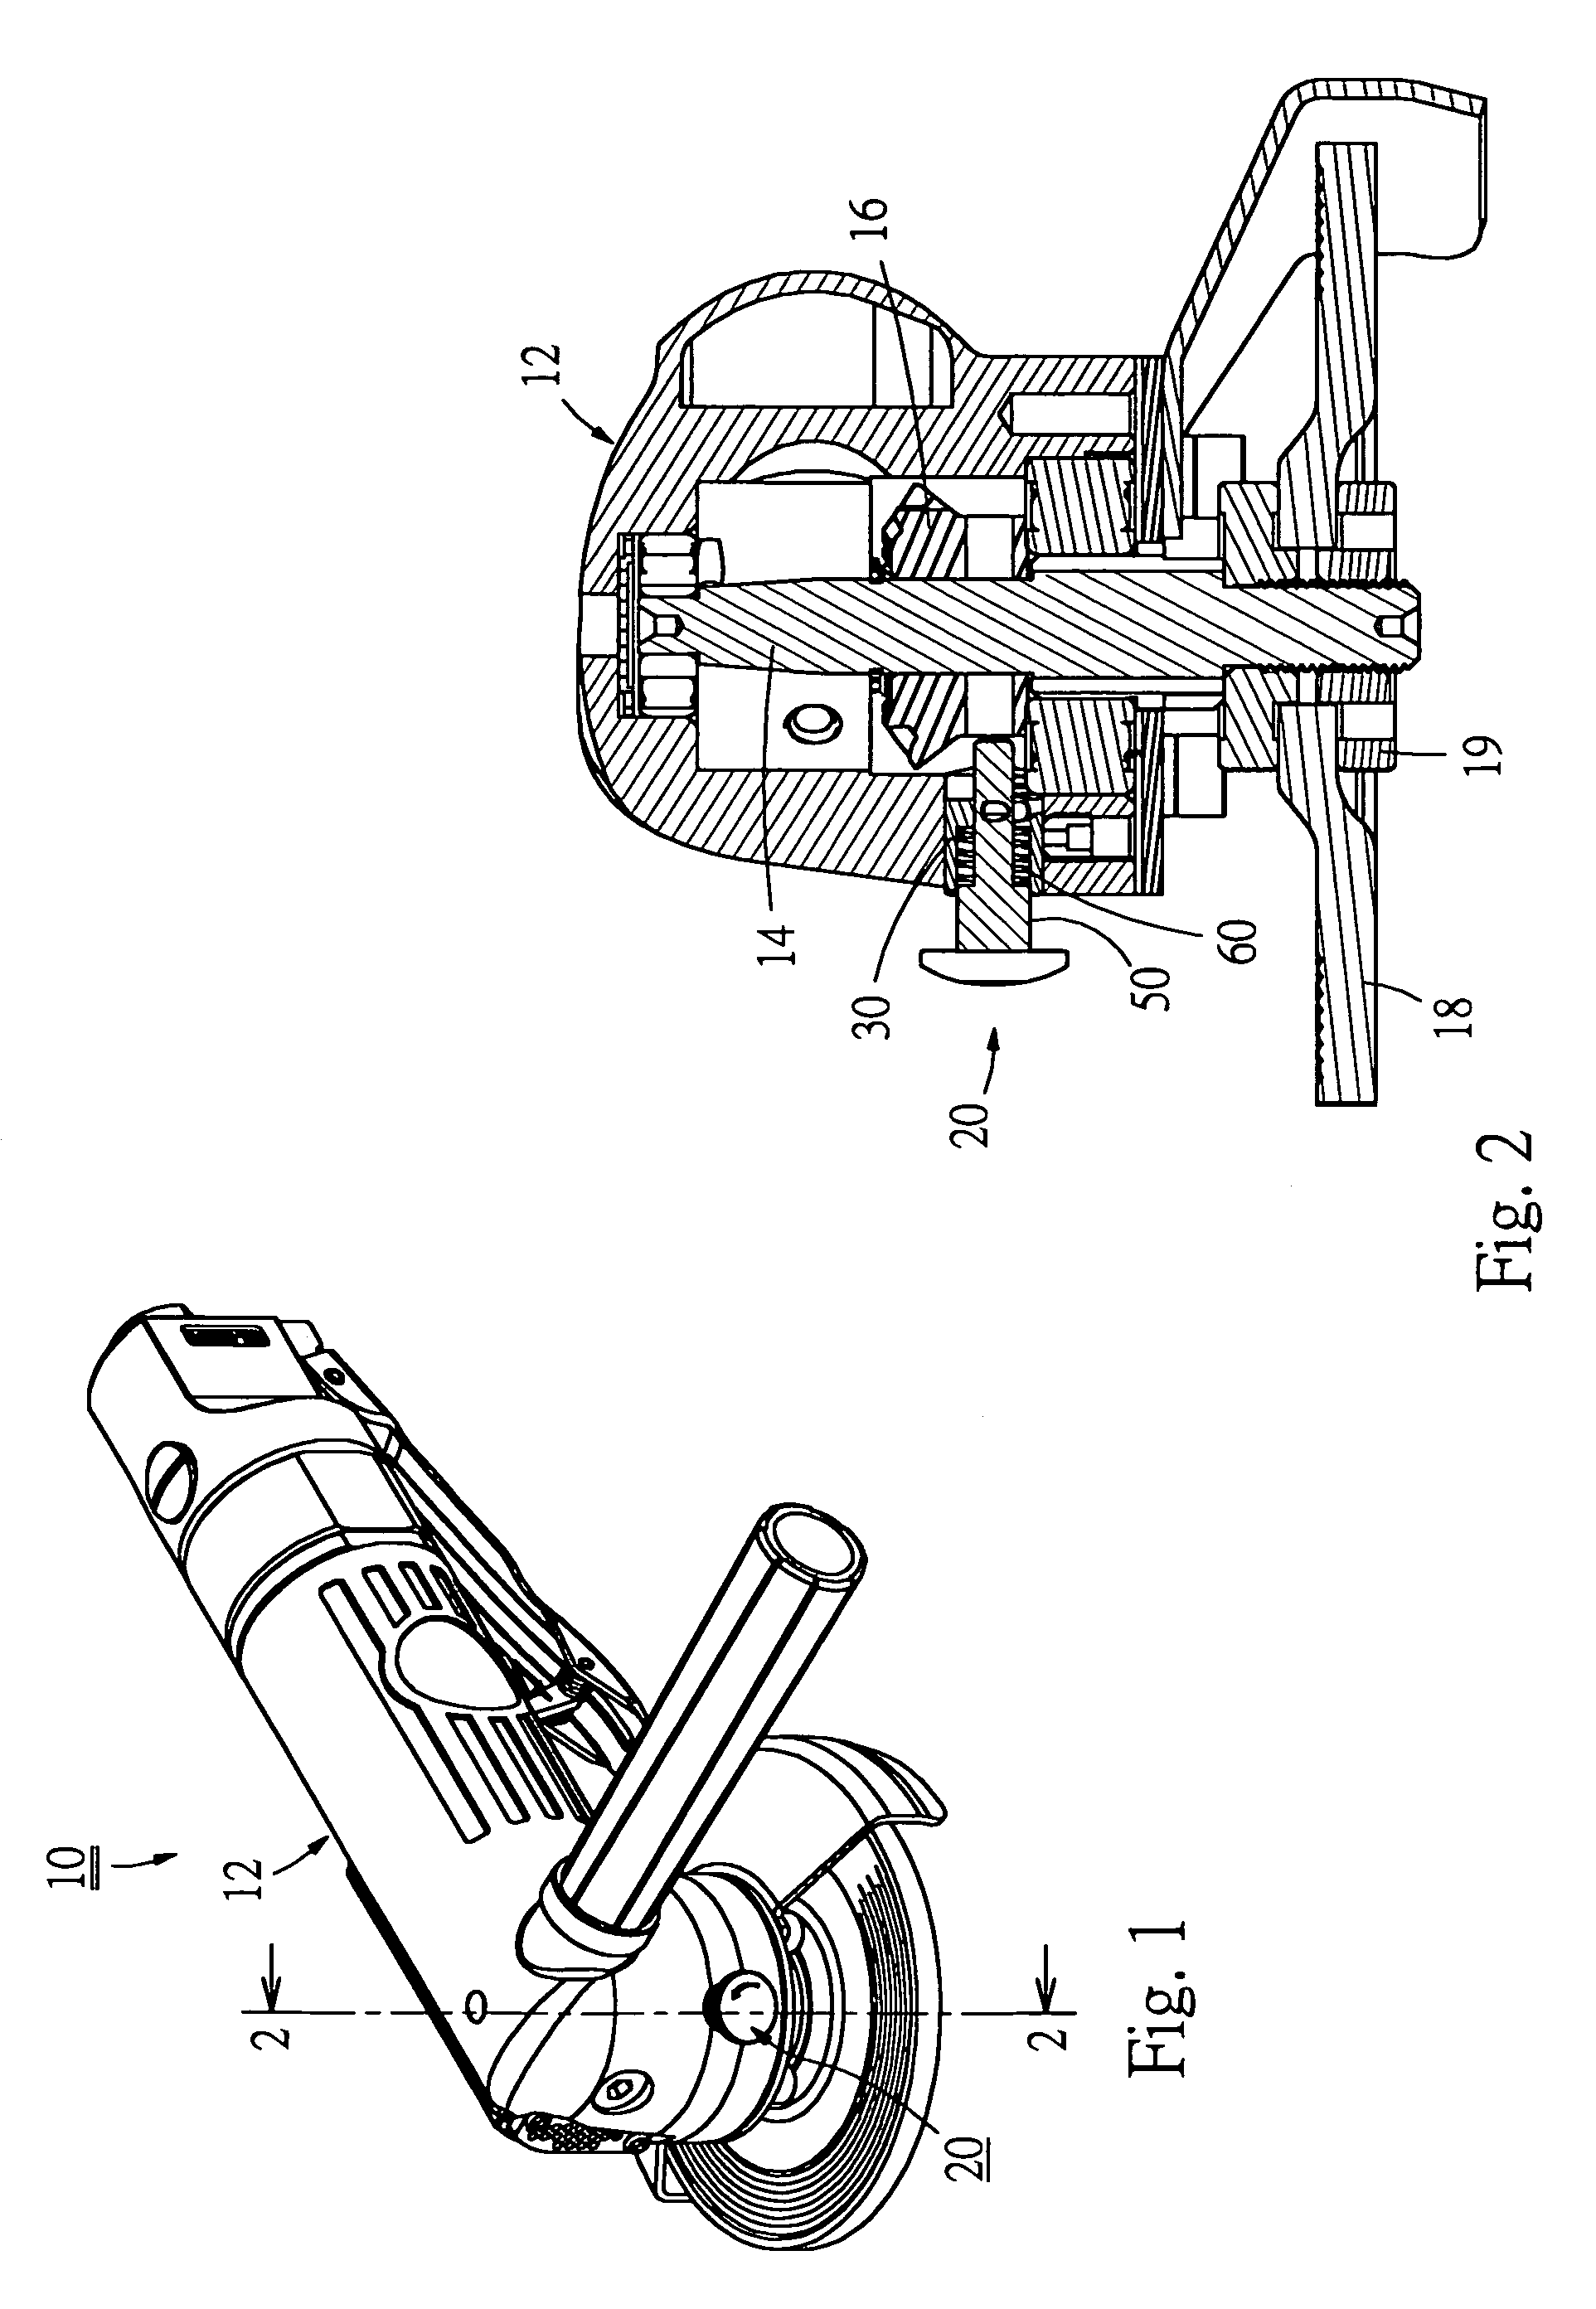 Grinder capable of seizing rotary shaft